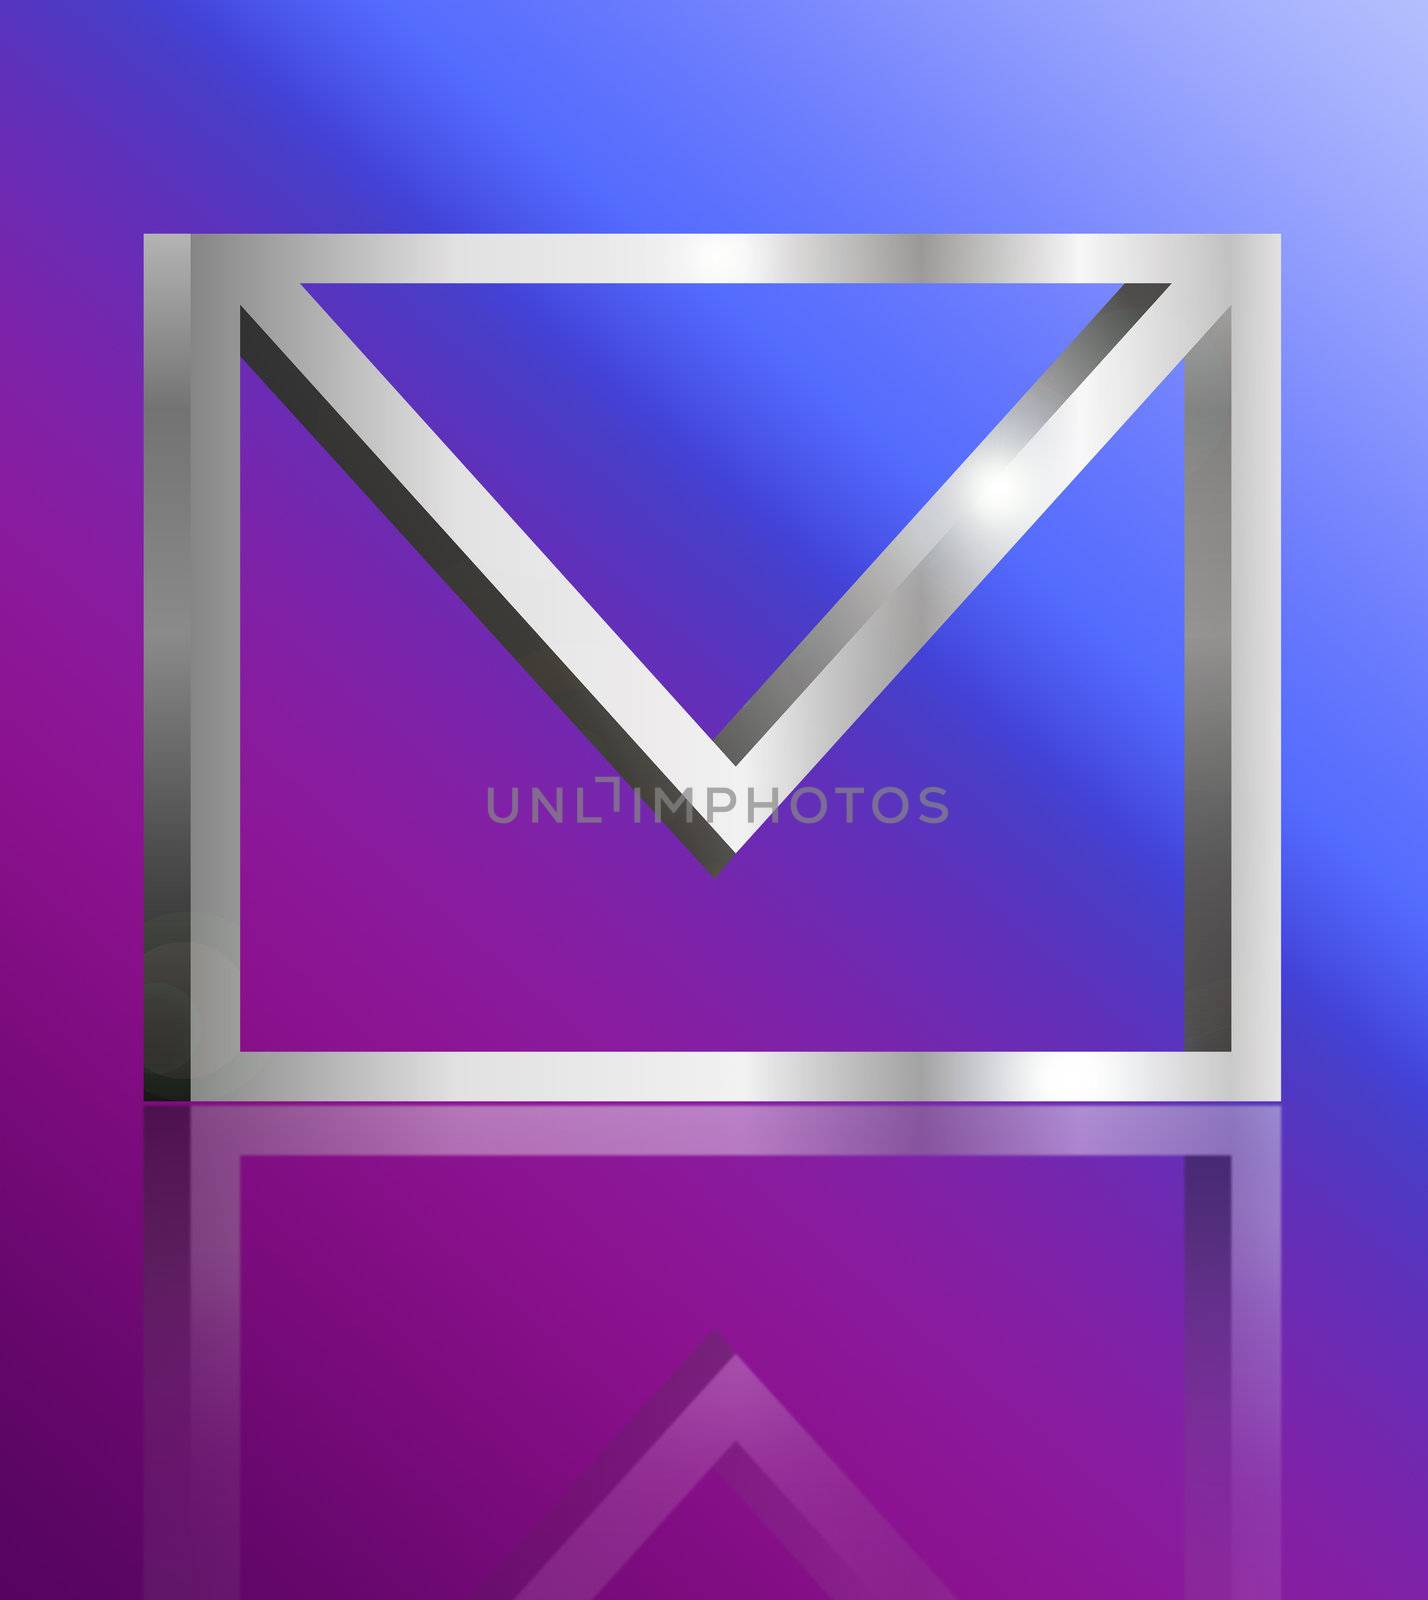 Illustration depicting a single metallic email symbol arranged over blue and pink light gradient and reflecting into foreground.